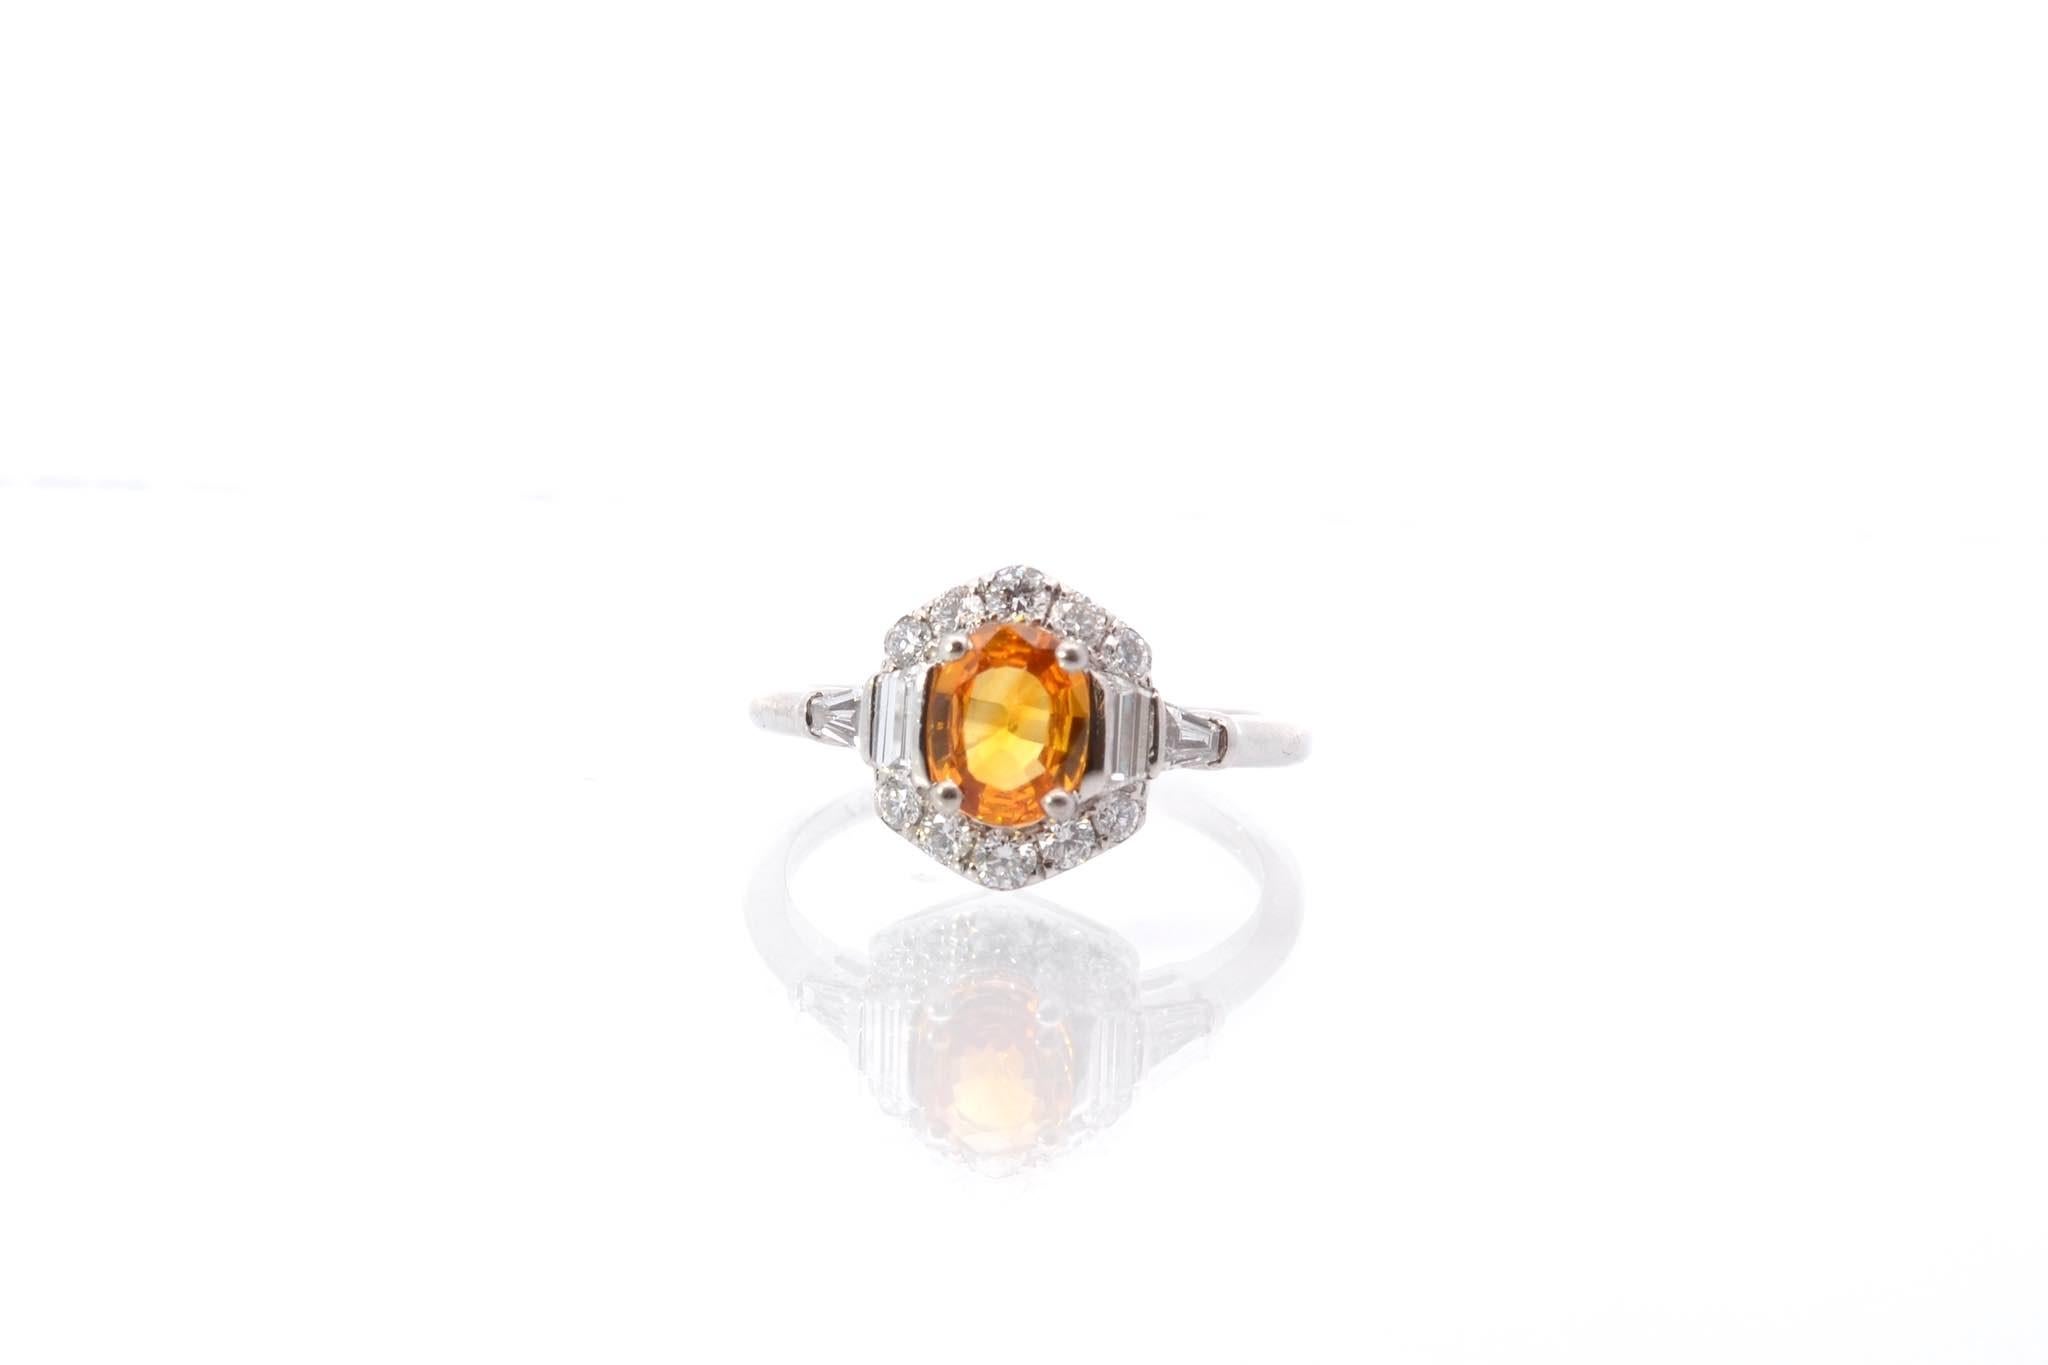 Stones: Yellow sapphire: 0.76 ct, 10 diamonds: 0.35 ct and 4 baguette diamonds: 0.26 ct
Material: 18k white gold
Dimensions: 1 x 0.9cm
Weight: 3.3g
Period: Recent vintage style
Size: 51 (free sizing) 
Certificate
Ref. : 25563